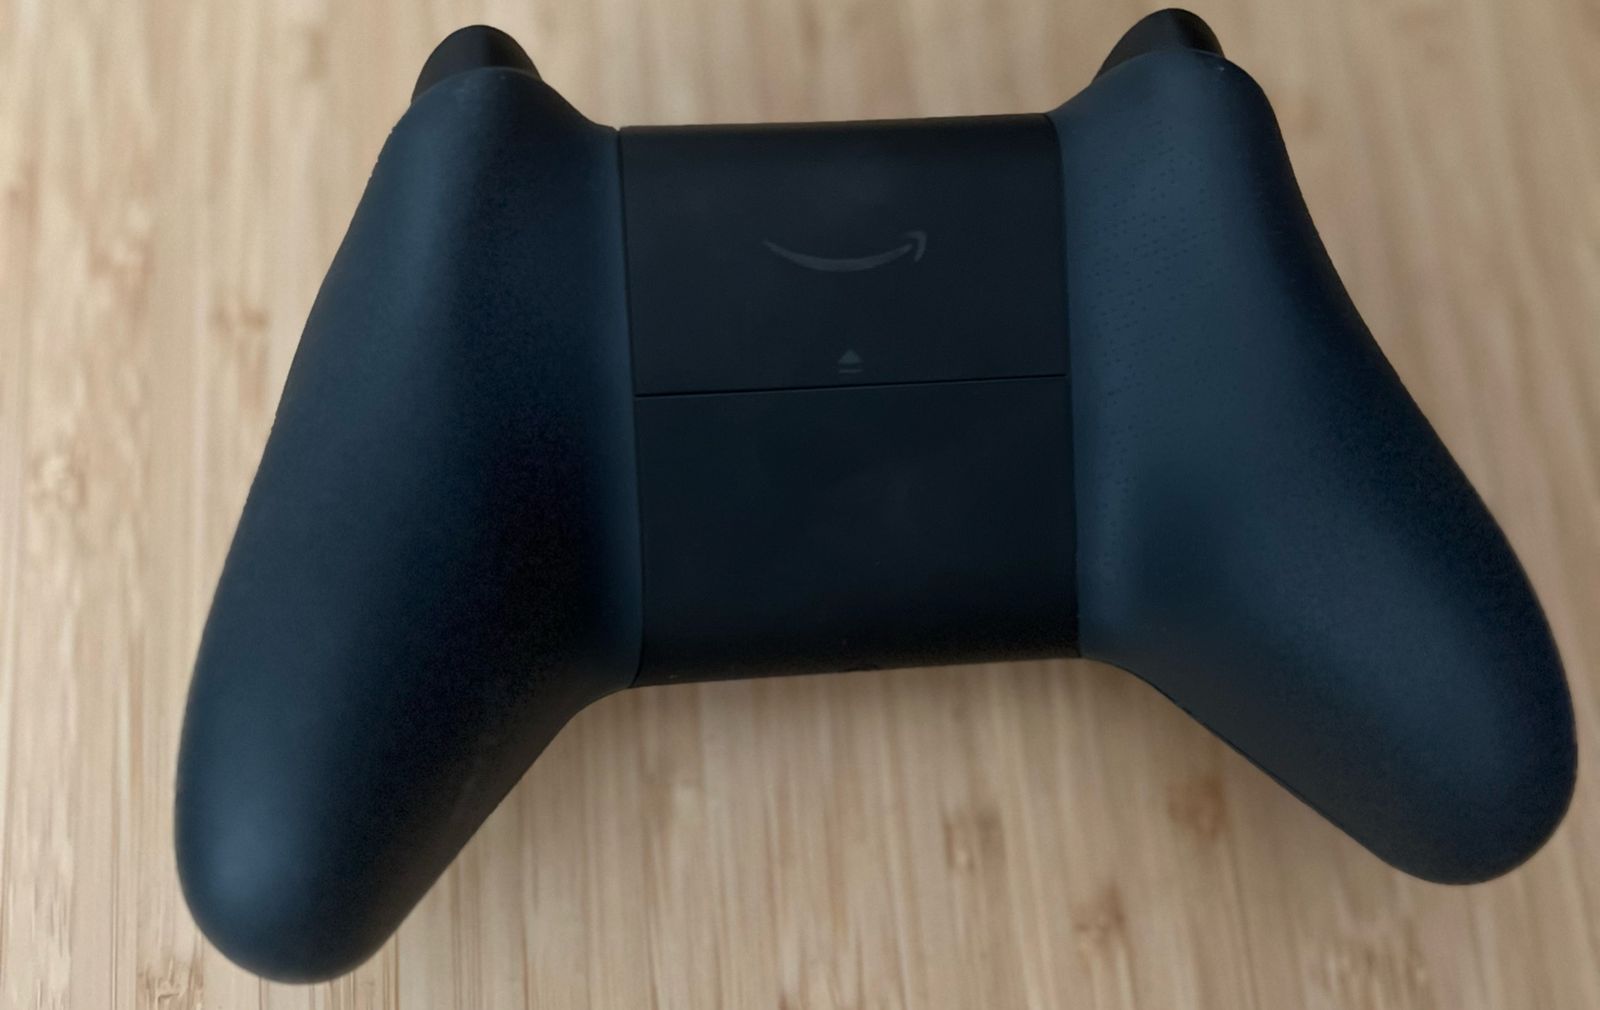 The back of the Amazon Luna controller